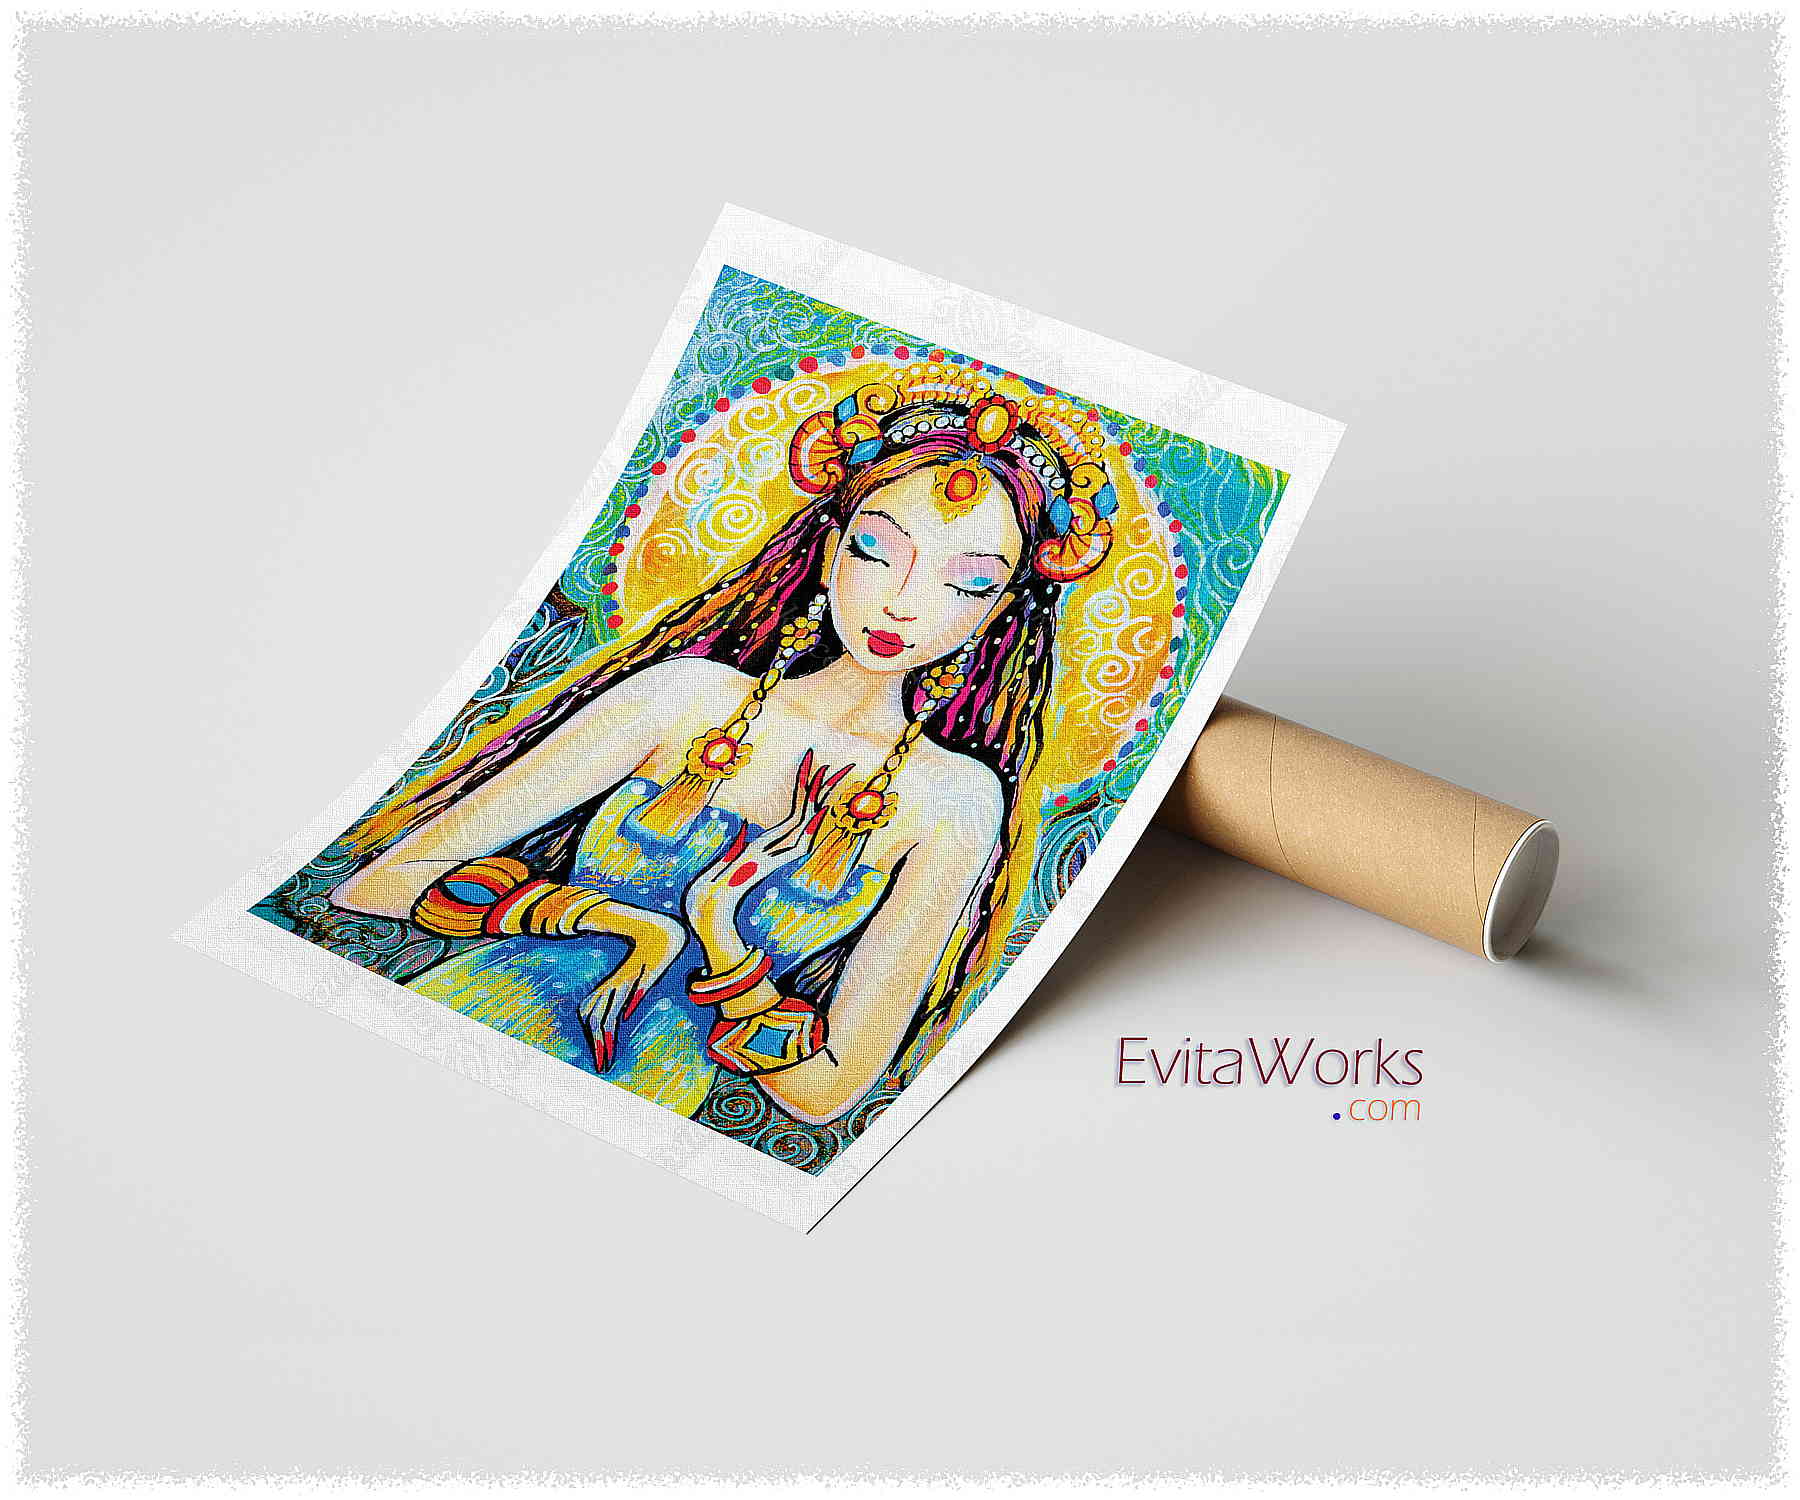 Hit to learn about "Quan Yin, Goddess of Mercy and Compassion" on prints